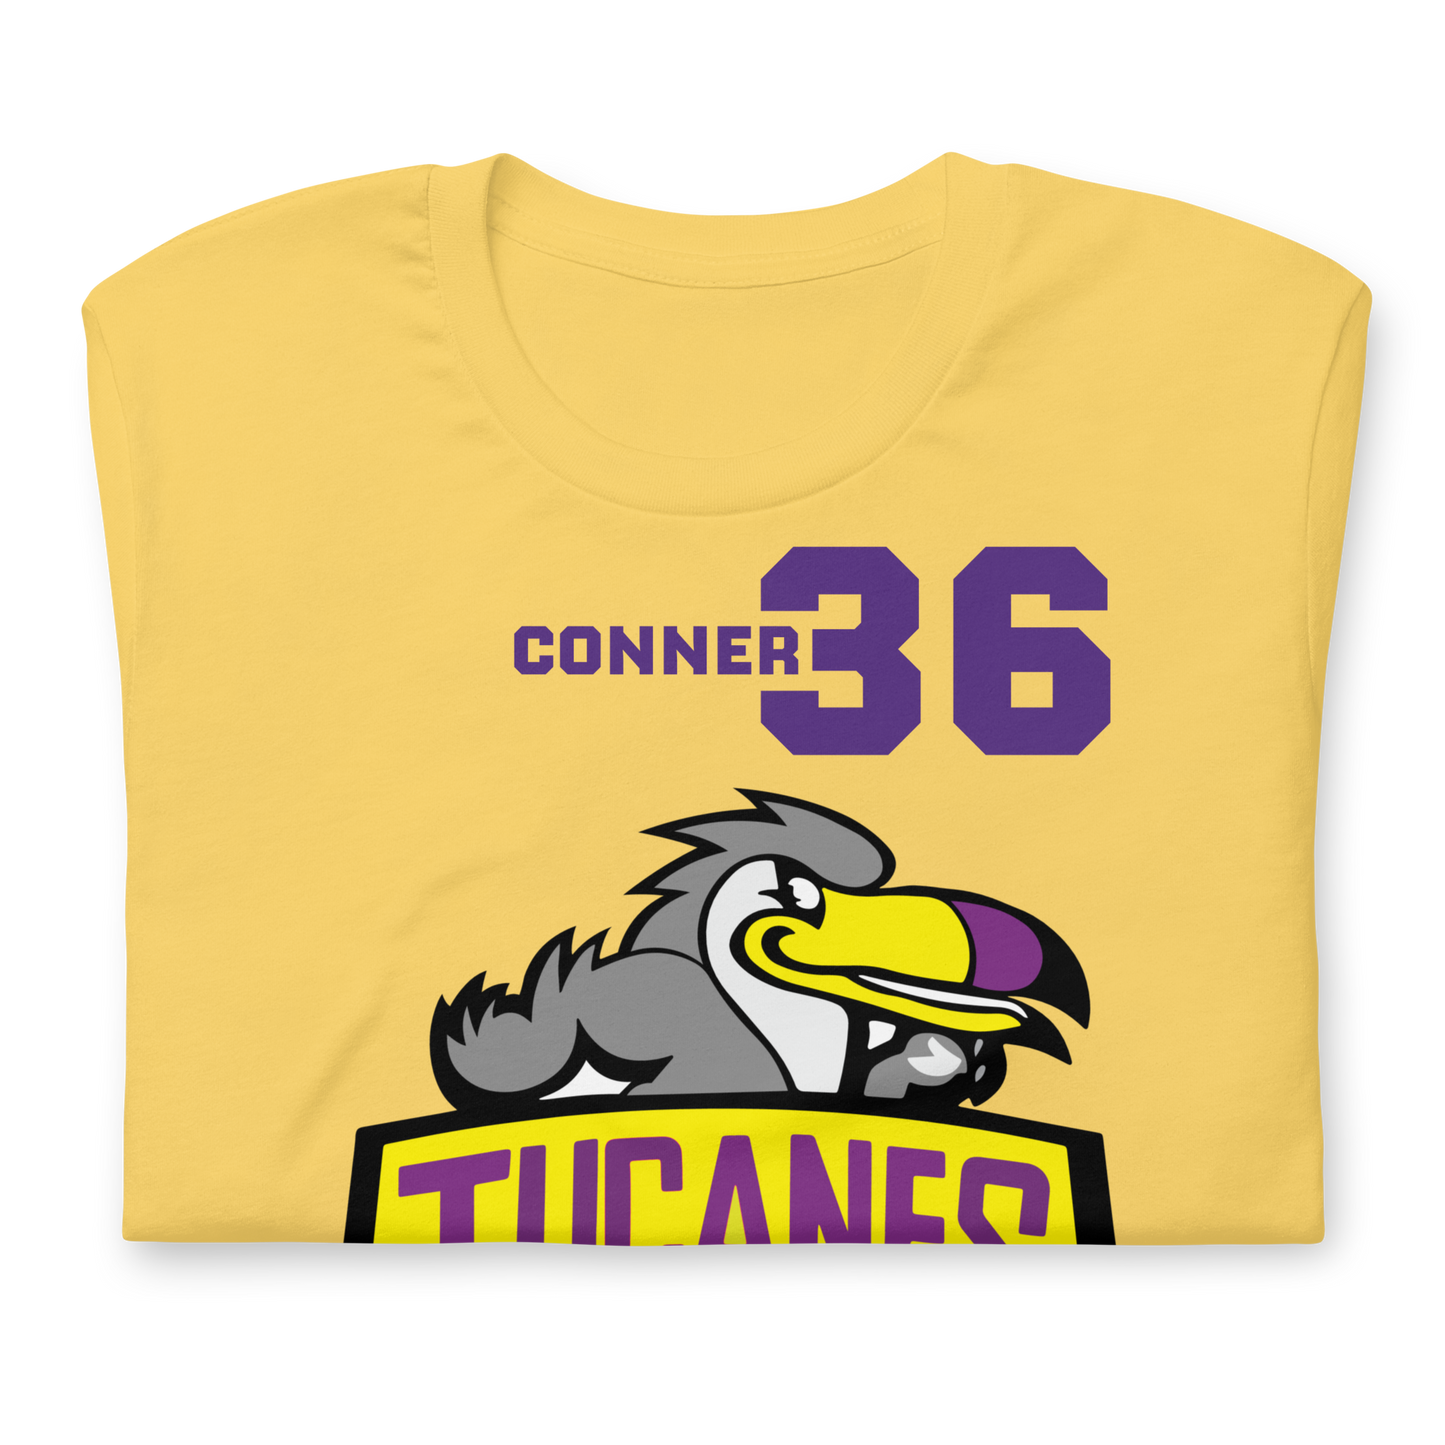 Trevor Conner #36 Official TucanesMX Player Tee 2K23 – Available Now! 🏀🔥